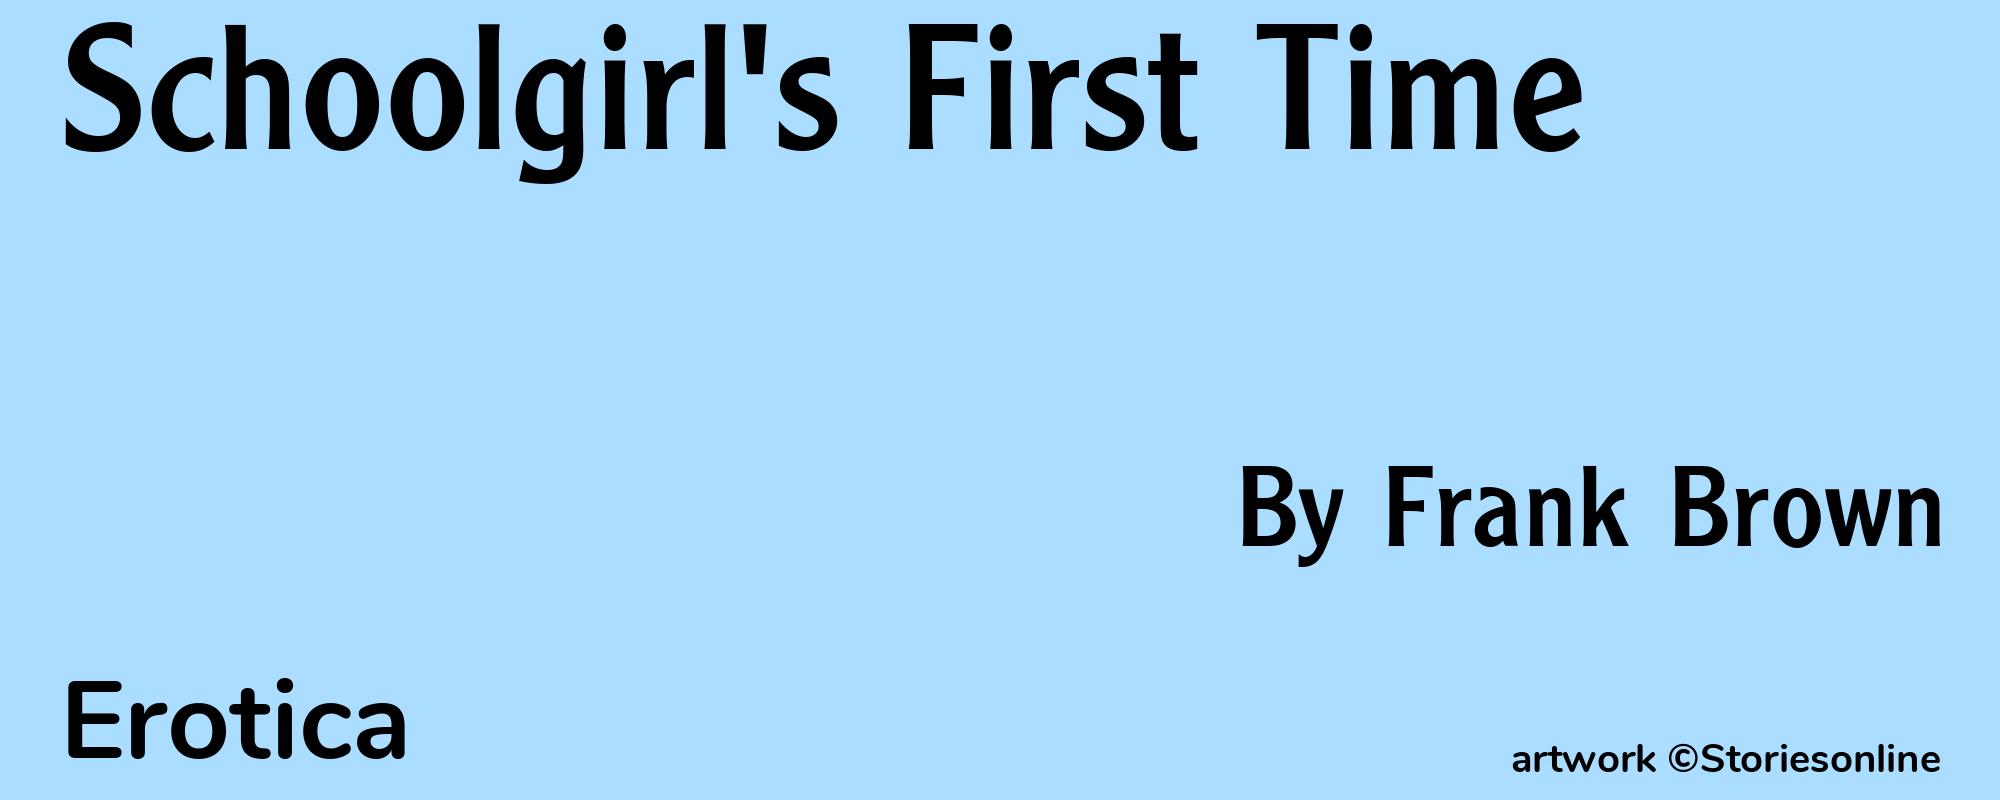 Schoolgirl's First Time - Cover